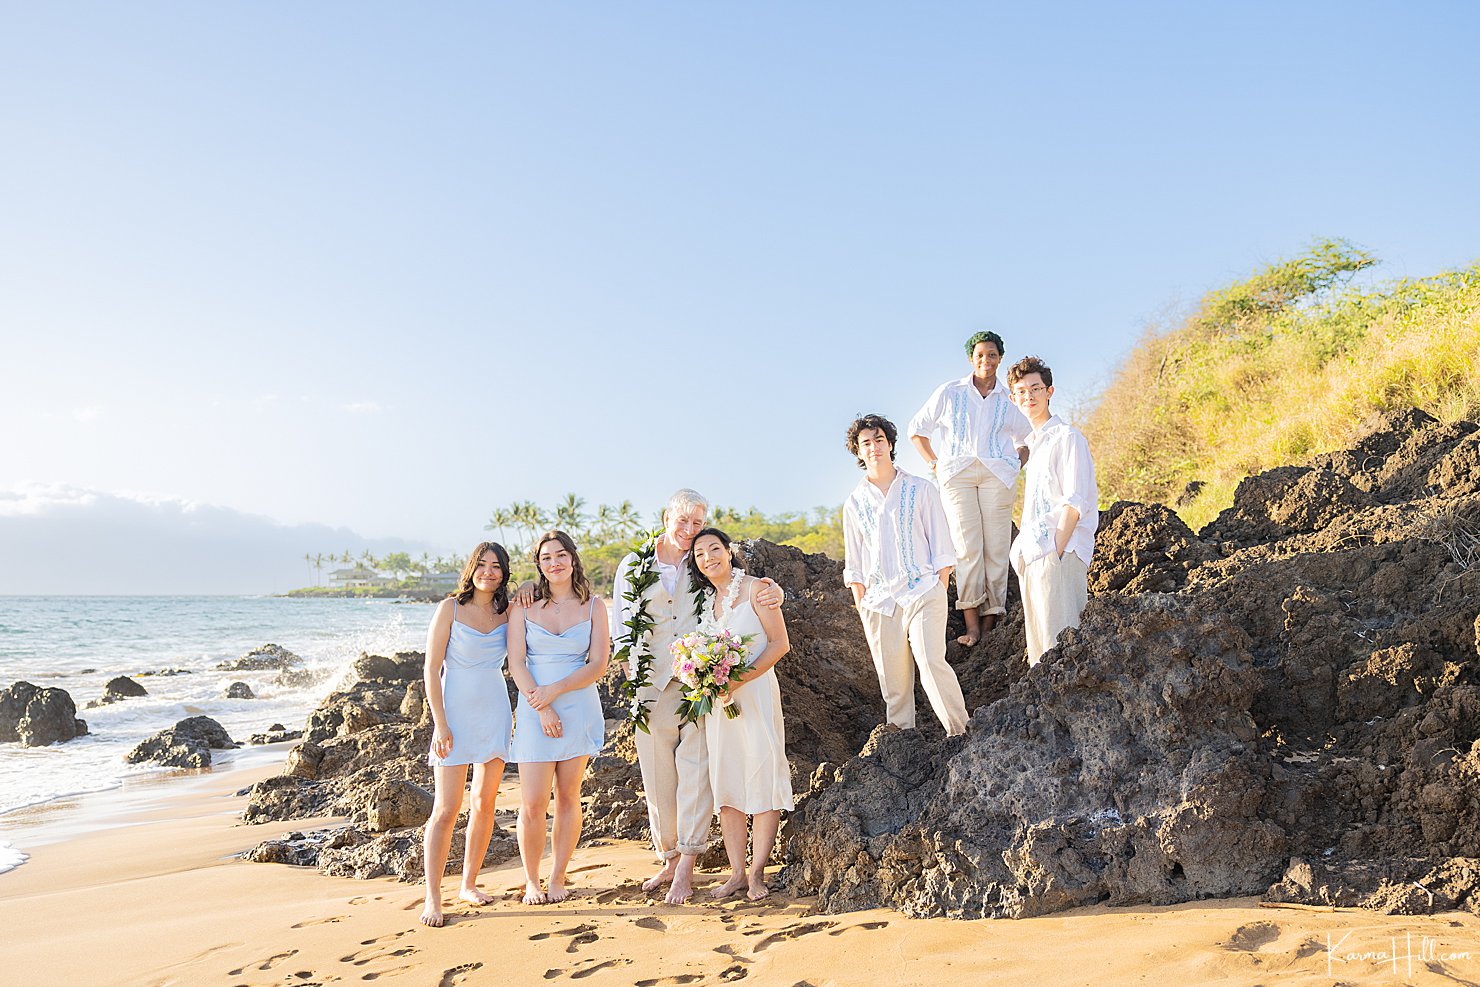 Get married in Maui on the beach